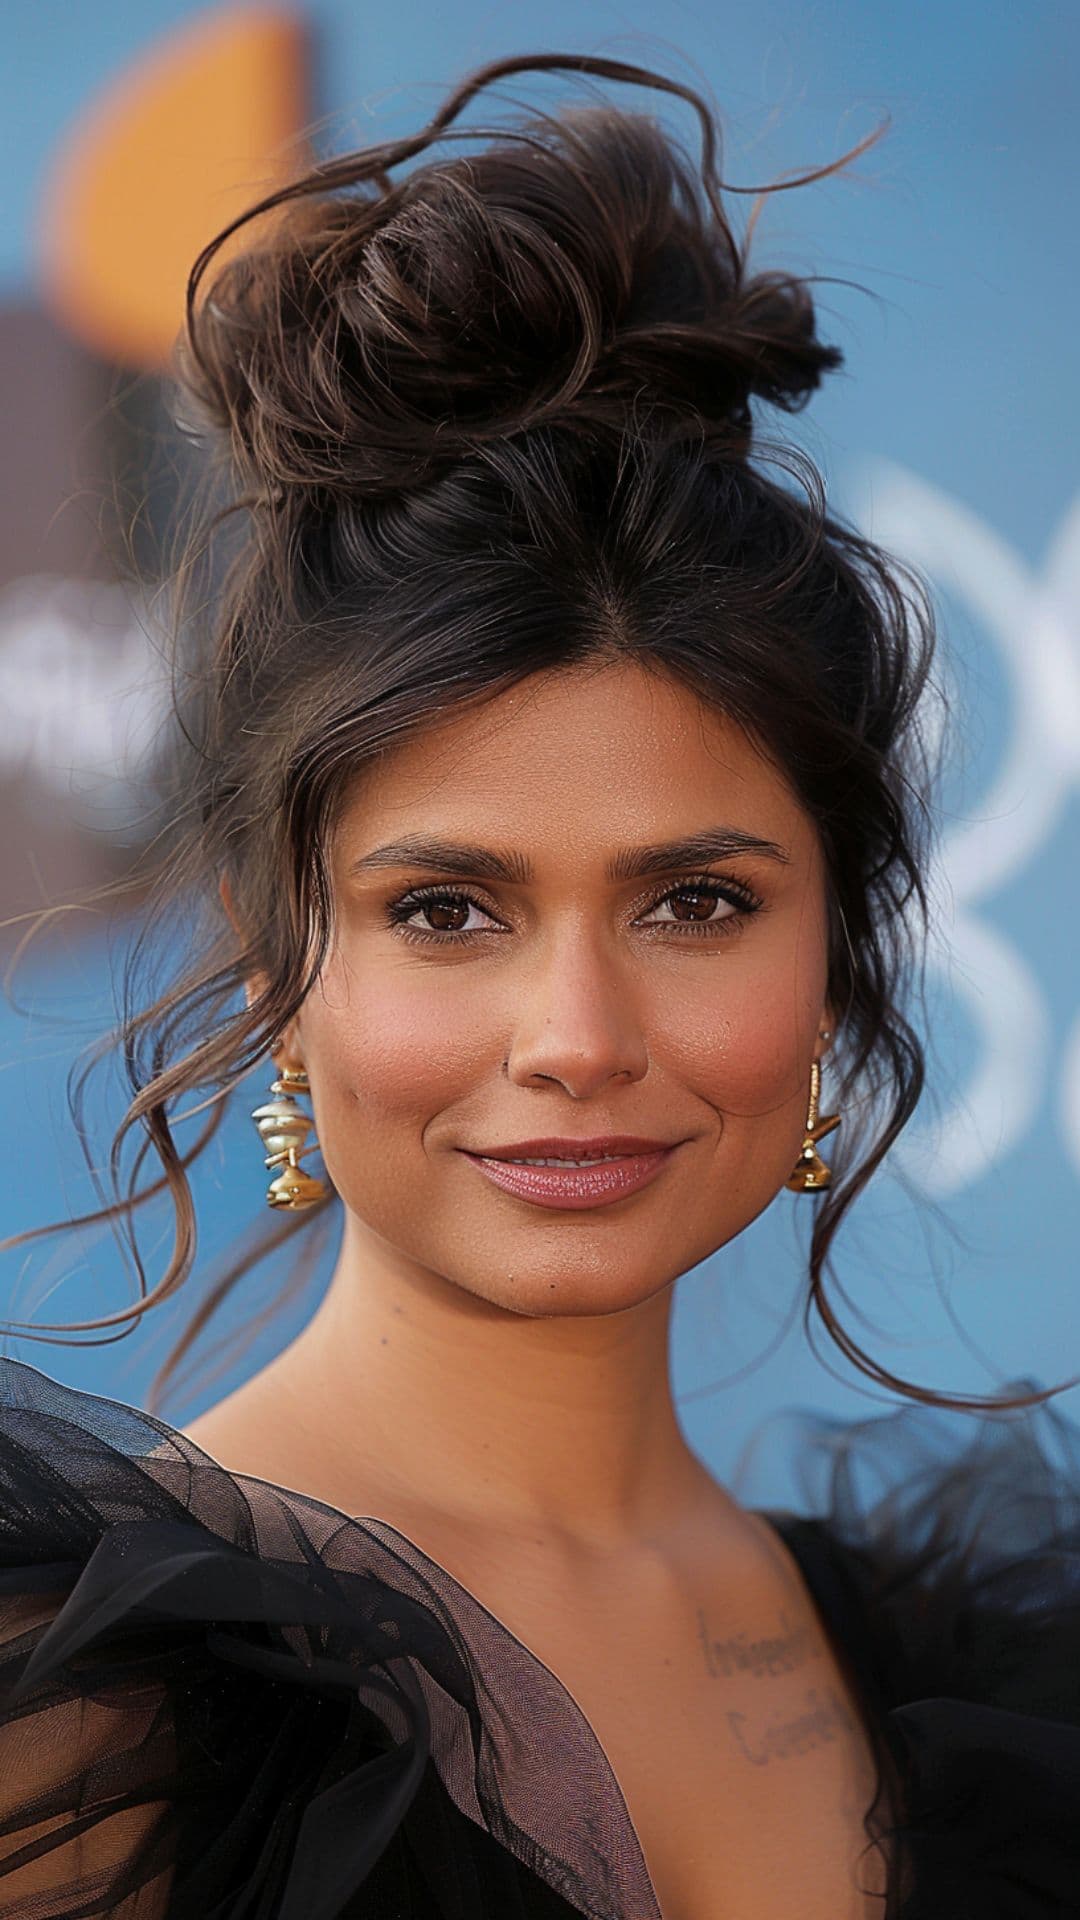 A woman modelling Mindy Kaling's top knot hair.